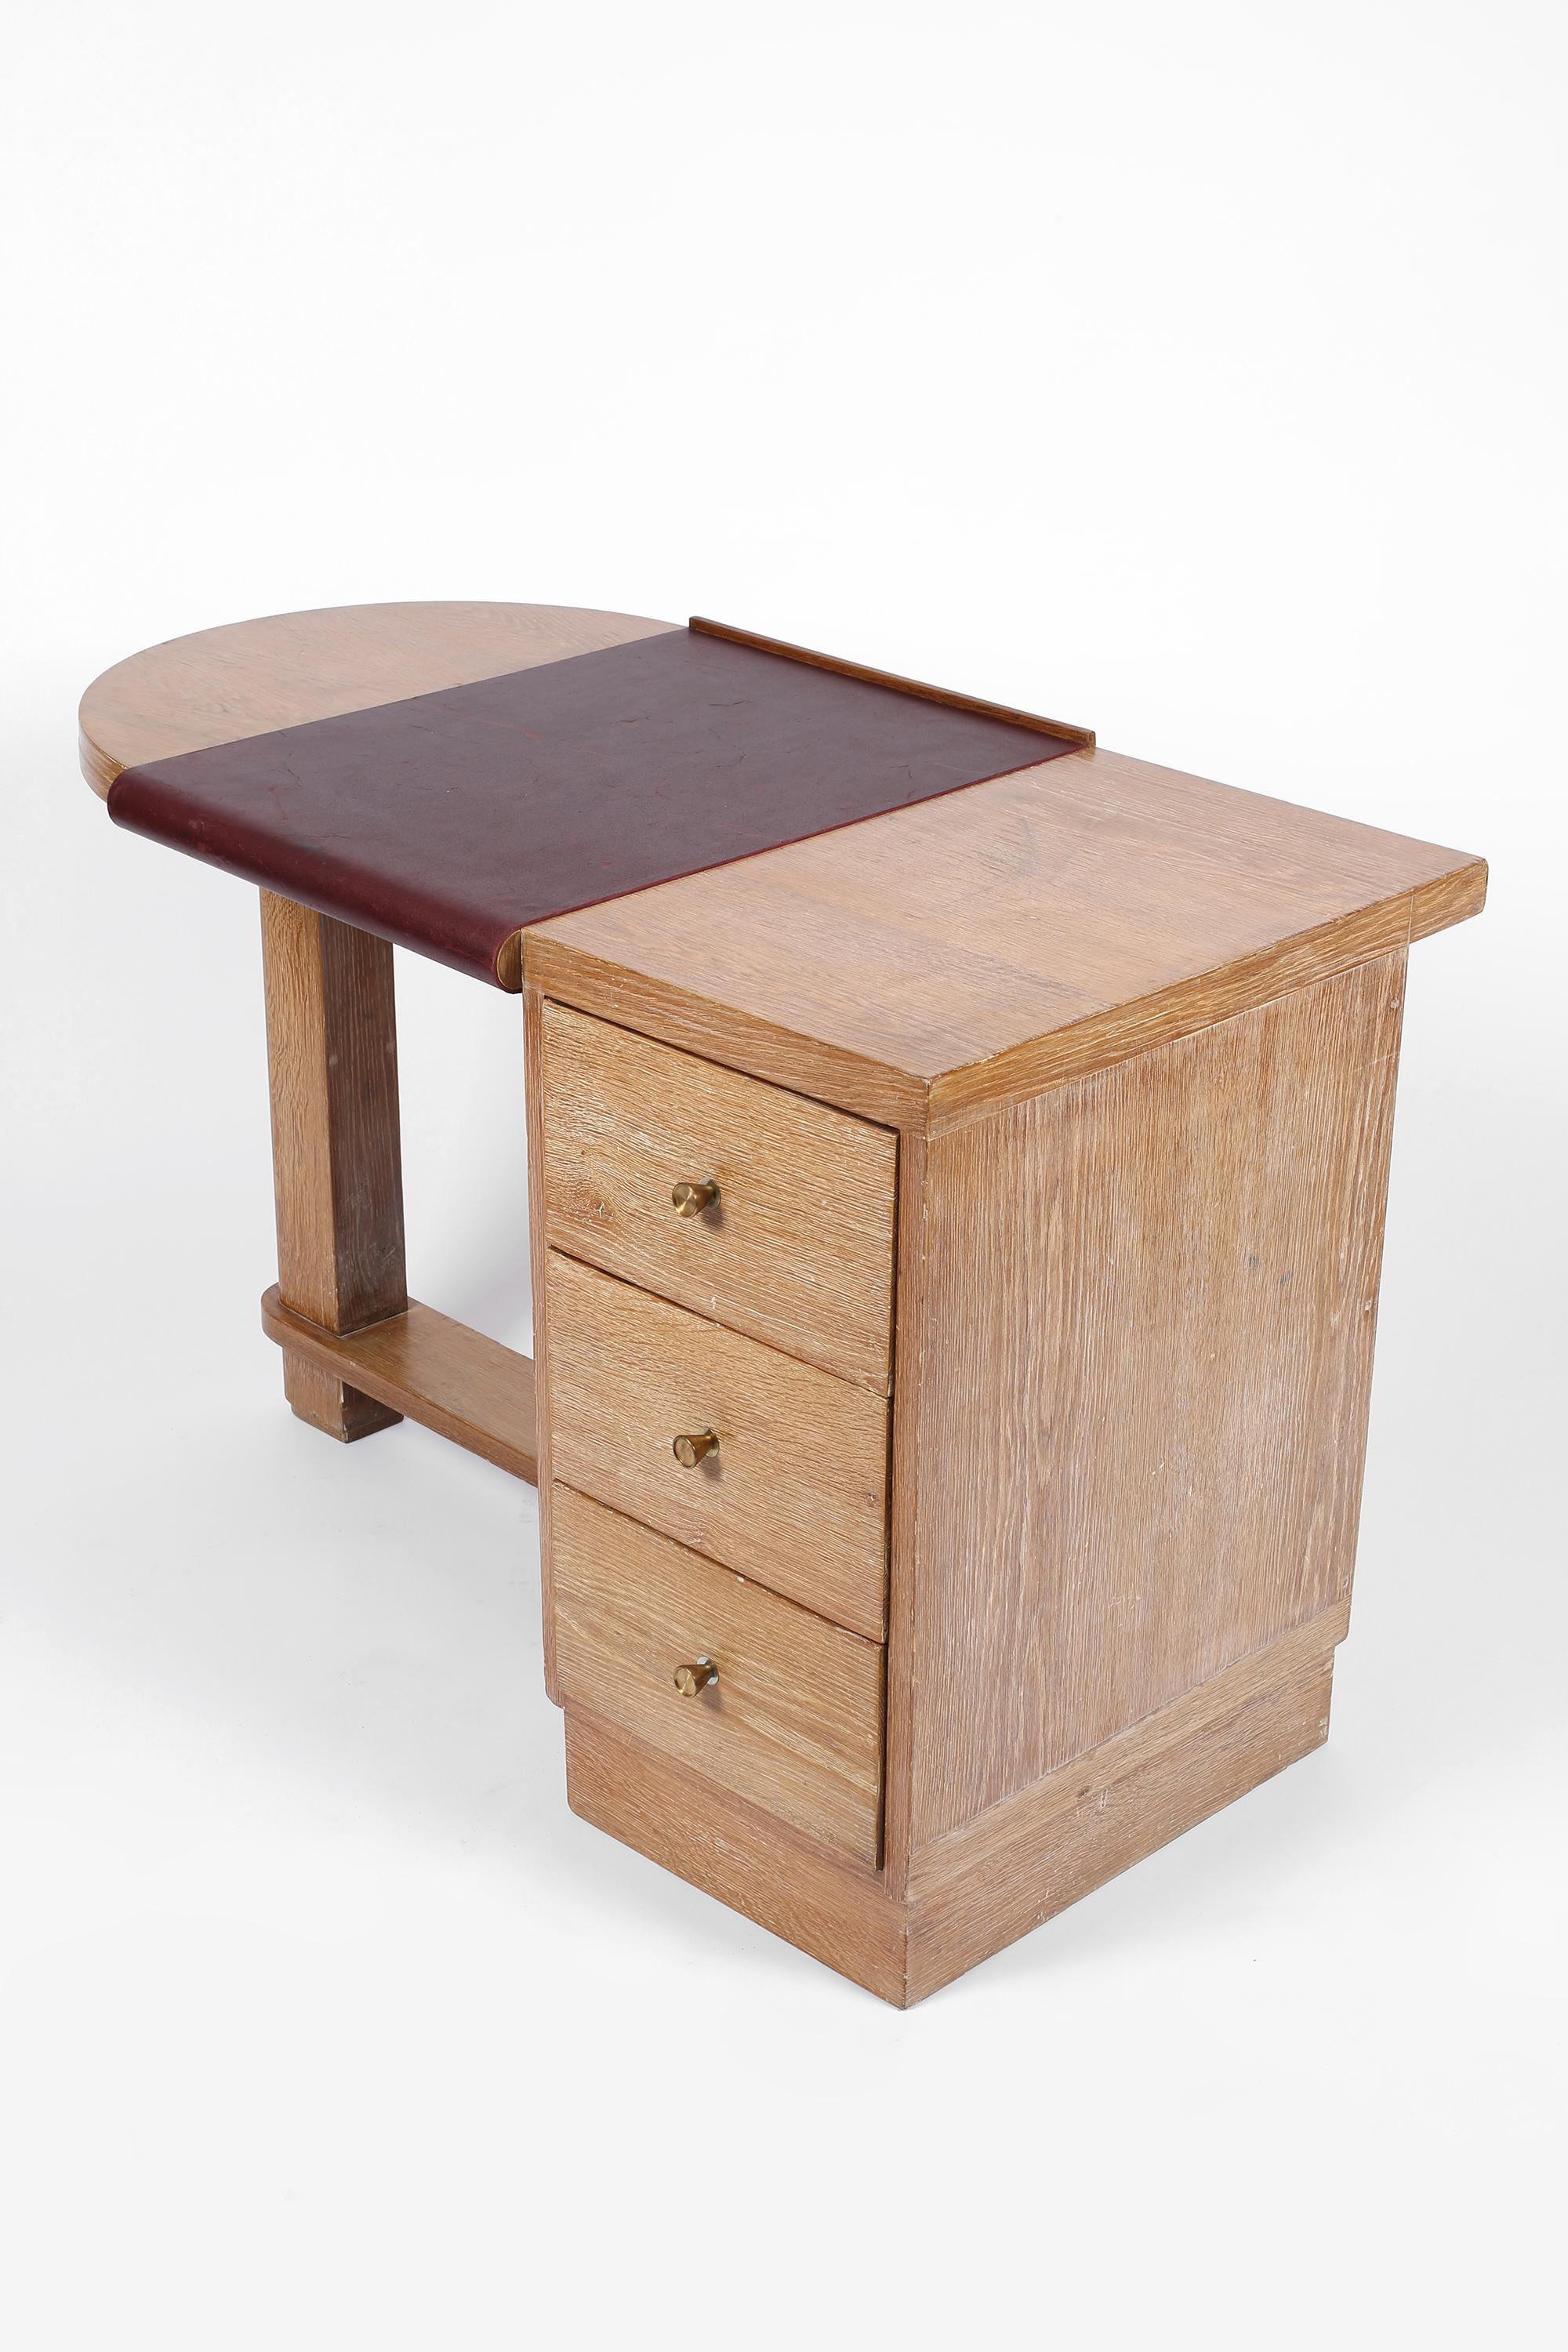 A modernist Art Deco desk in limed oak with partially clad oxblood leather top. With clean lines and simple brass drawer pulls, very much in the manner of Jacques Adnet or Eugene Printz. French, c. 1930s.

